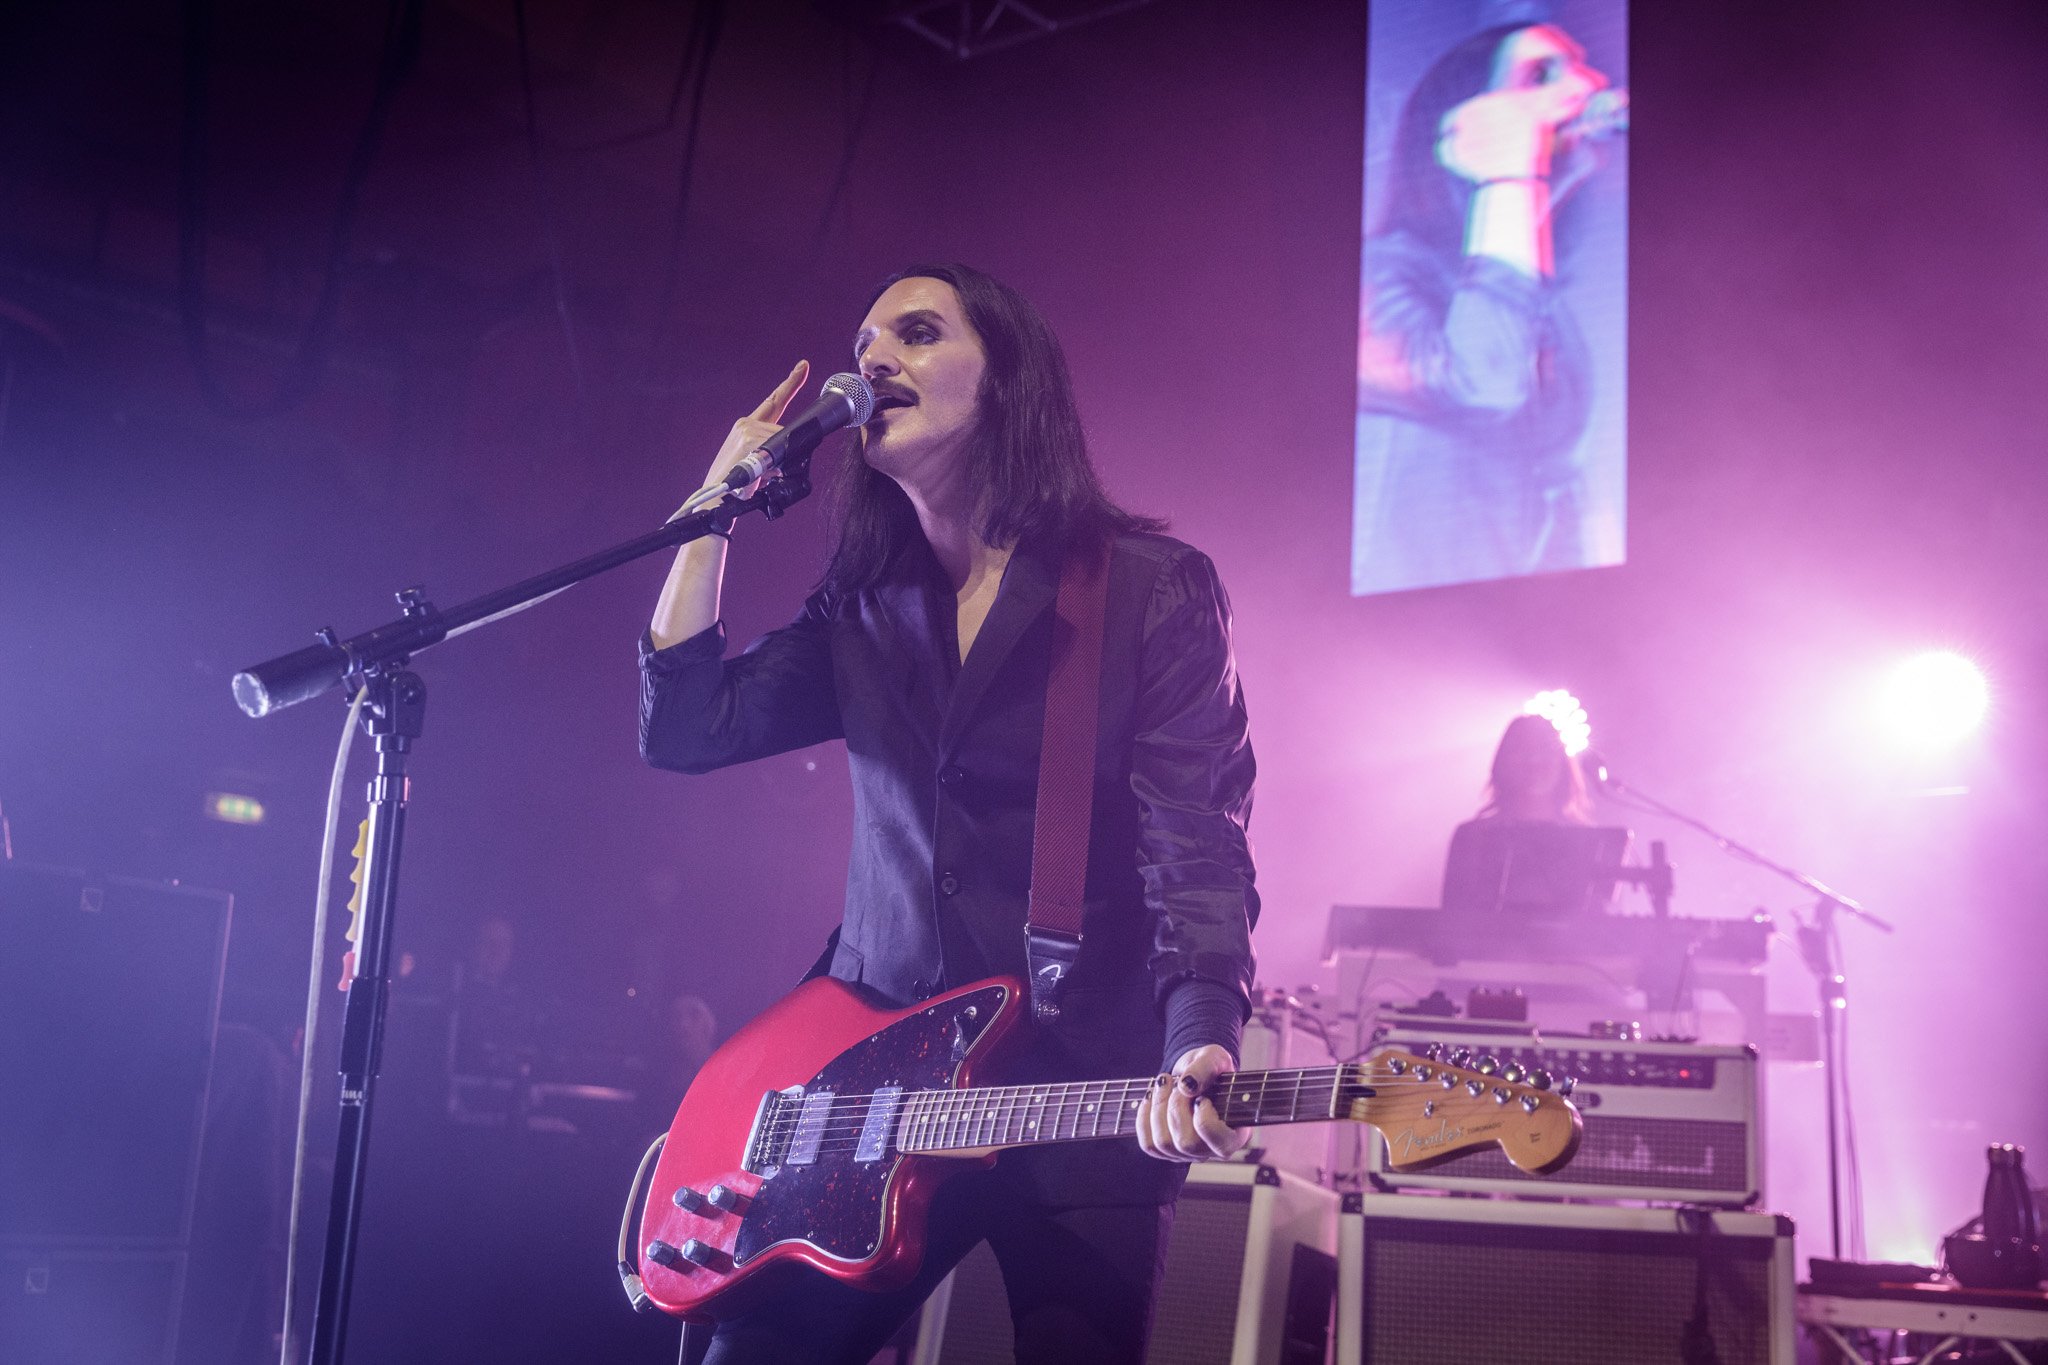 Placebo at Eventim Olympia in Liverpool on November 21st 2022 ©